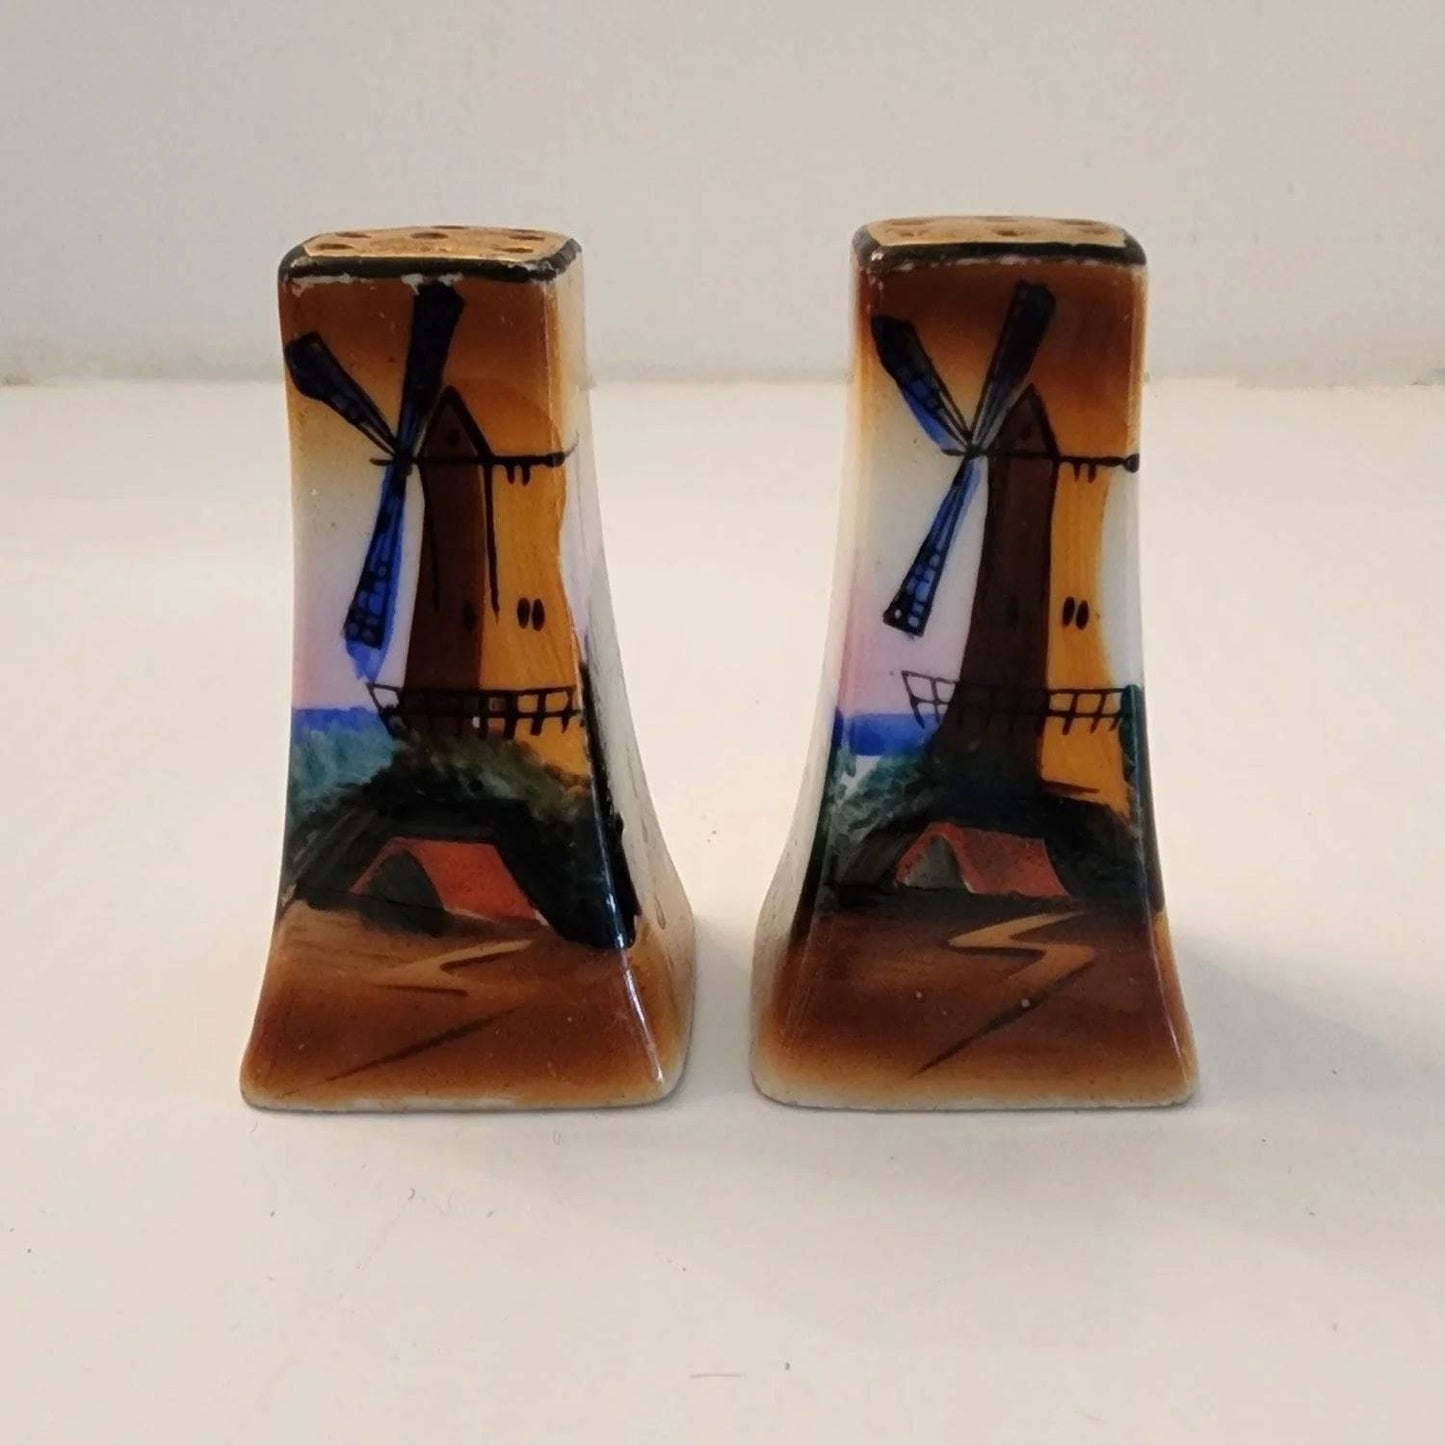 Two small salt and pepper shakers featuring a windmill design. Perfect for adding flavor to your meals.